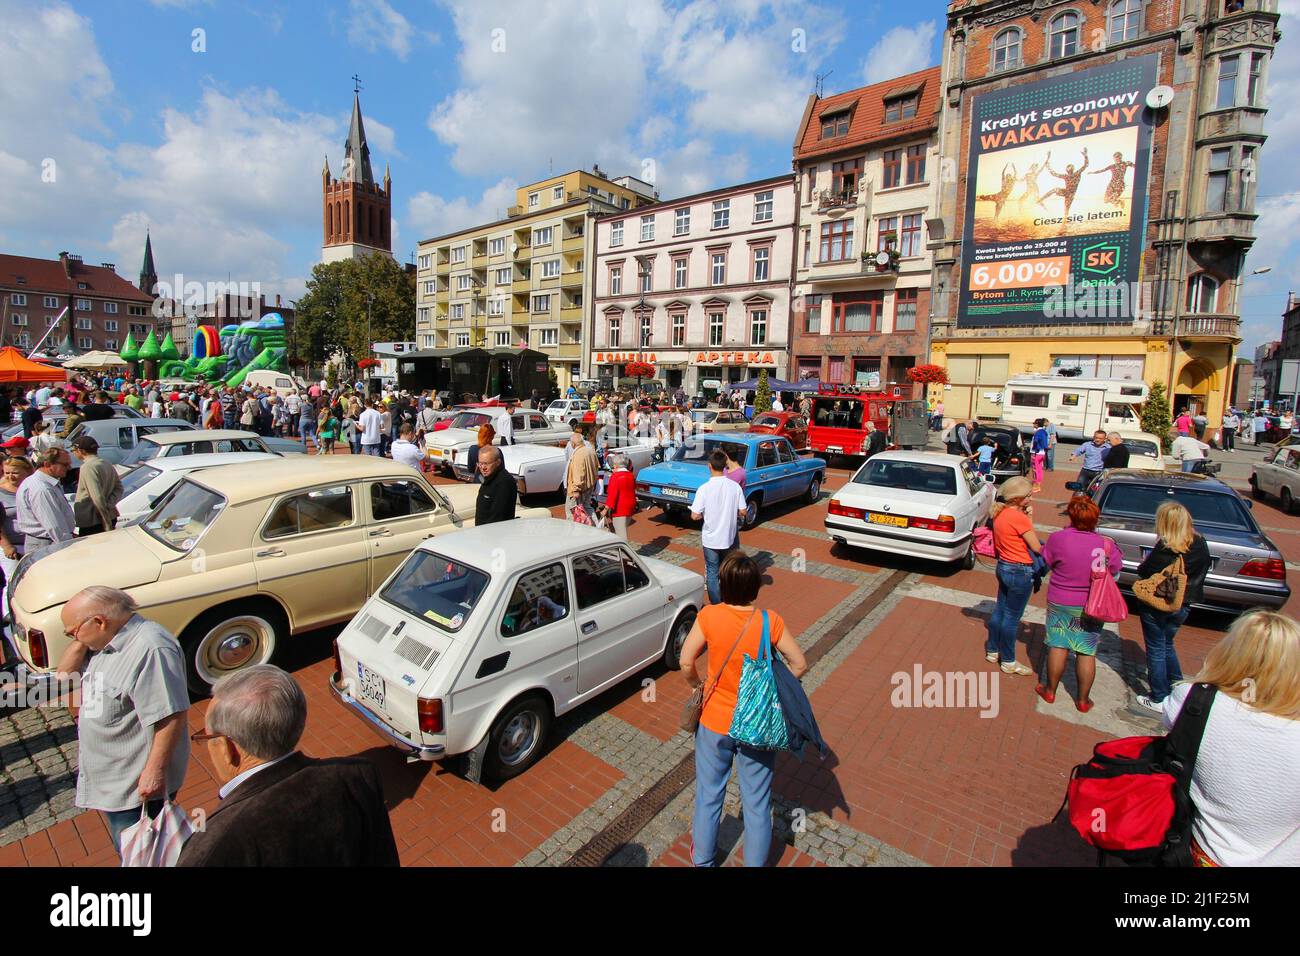 BYTOM, POLAND - SEPTEMBER 12, 2015: People admire classic oldtimer cars during 12th Historic Vehicle Rally in Bytom. The annual vehicle parade is one Stock Photo